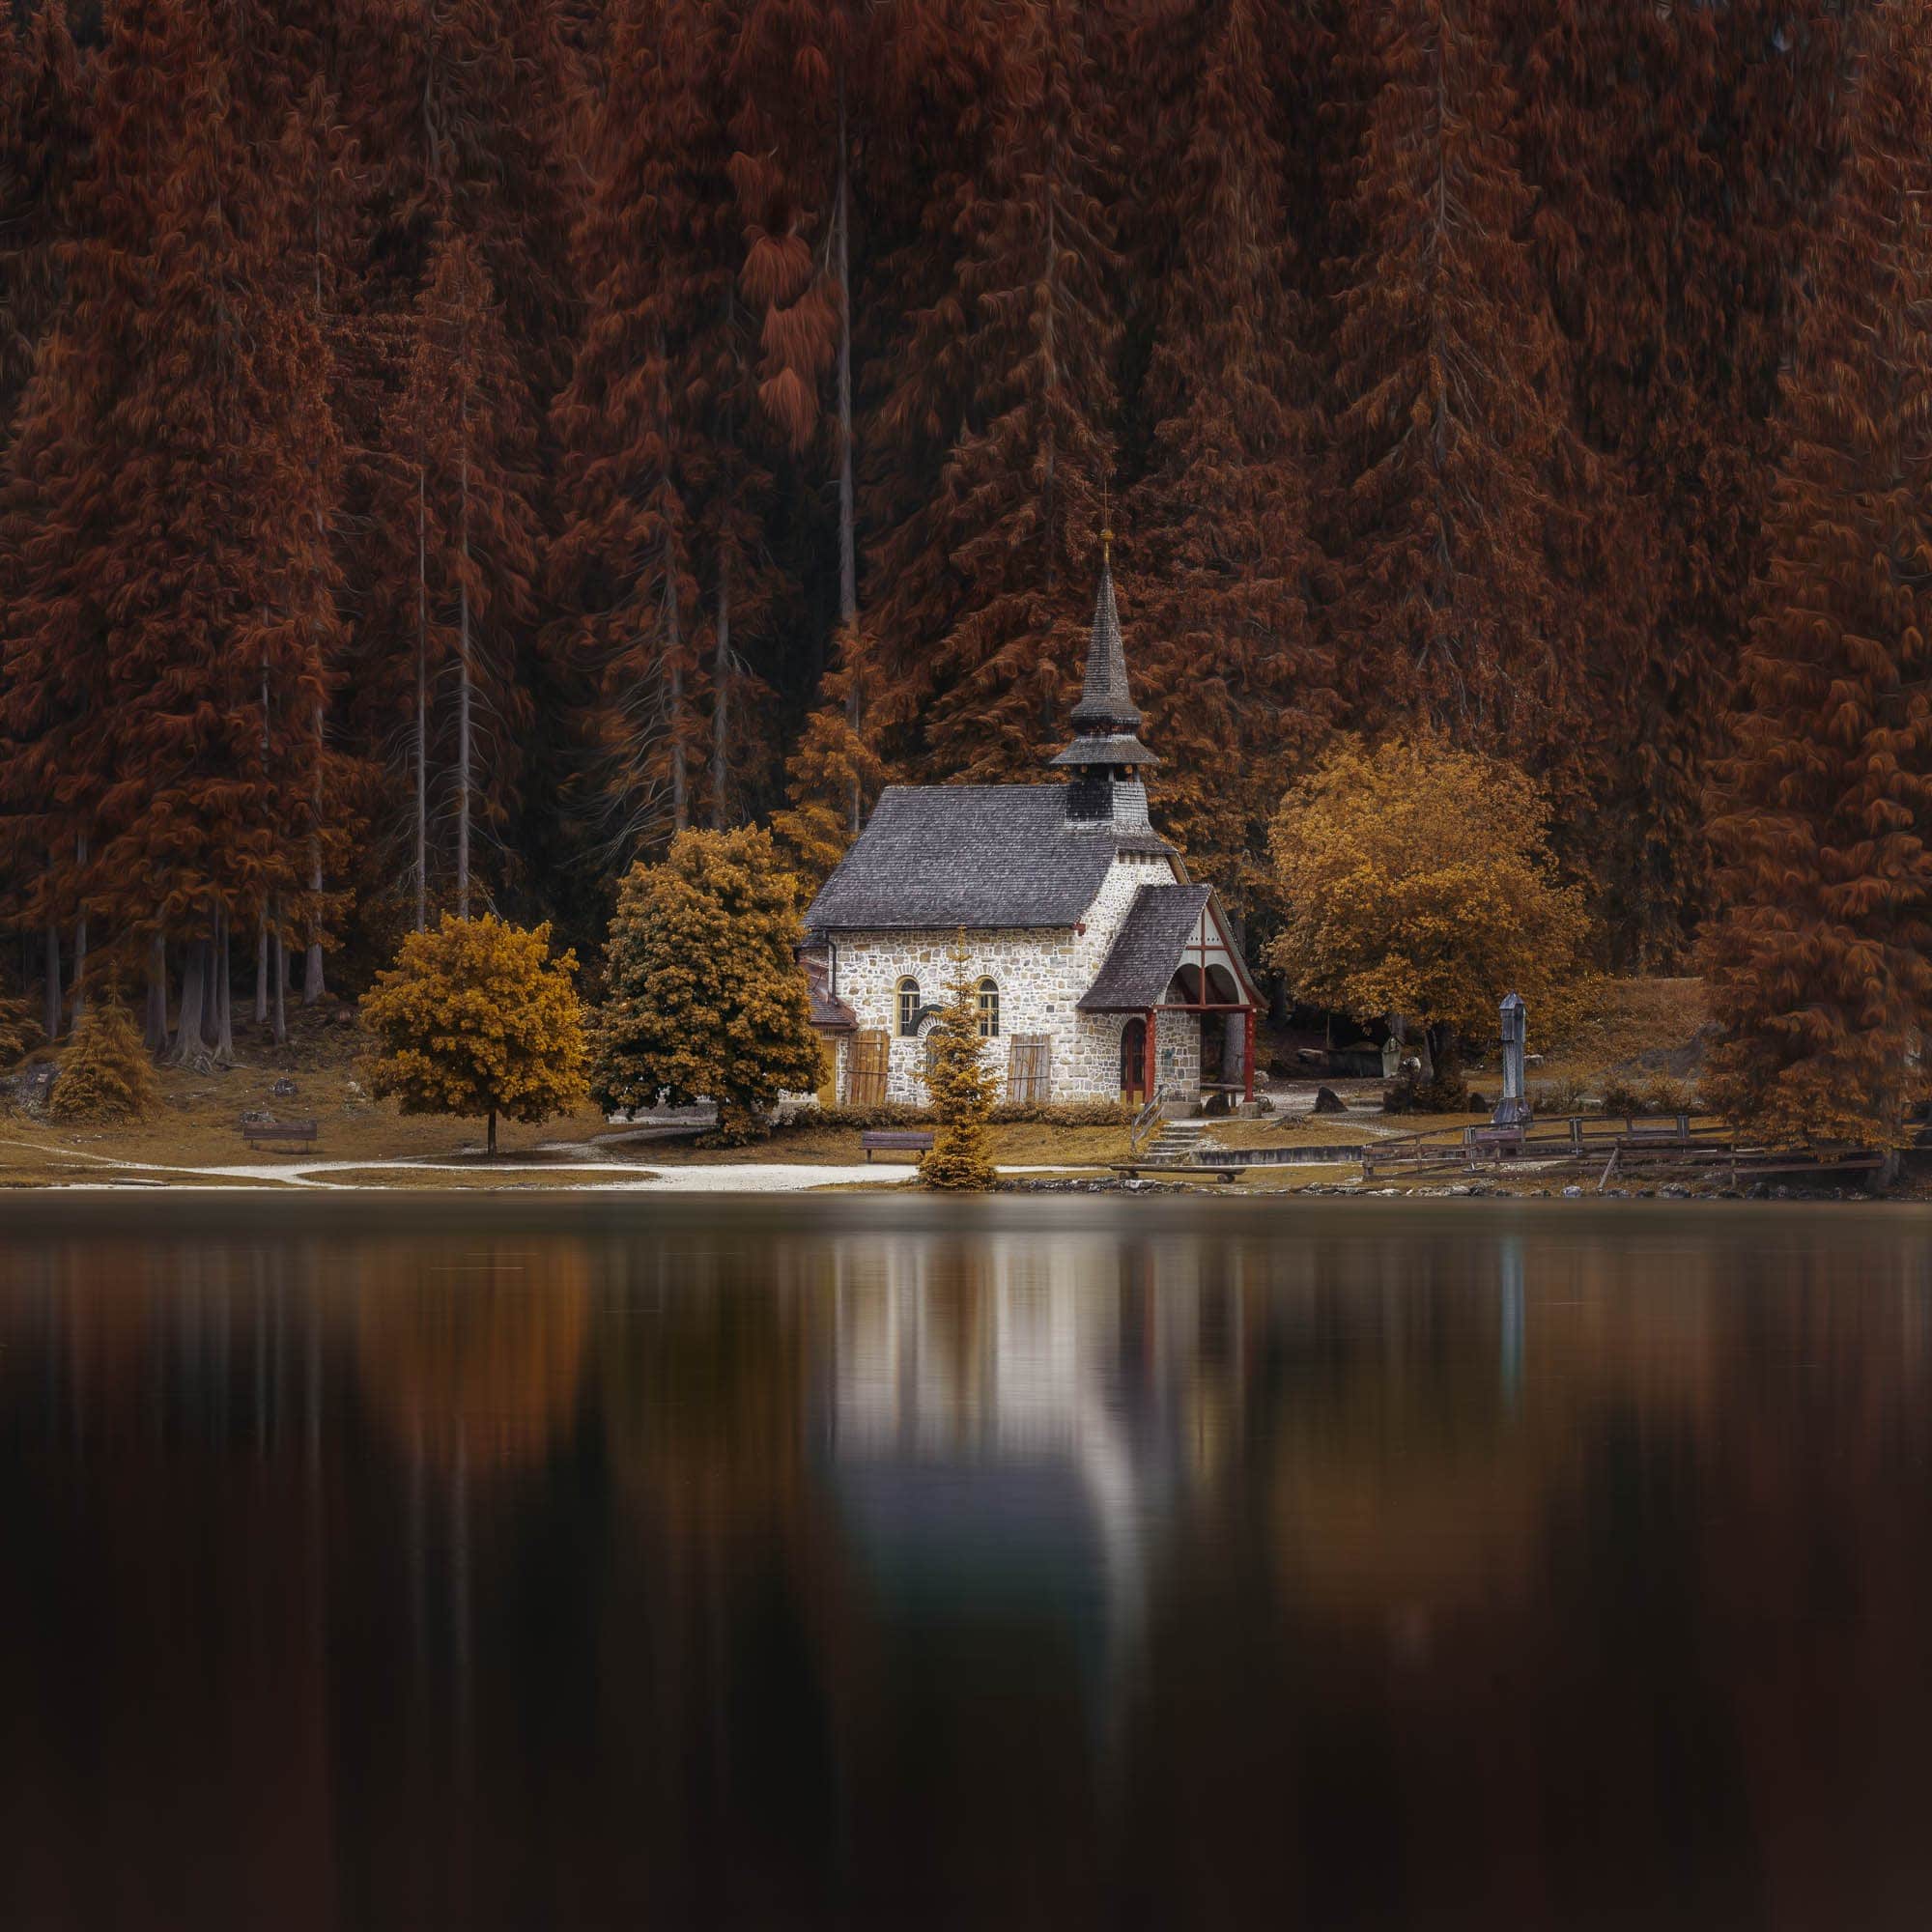 A small stone chapel with a spire, surrounded by trees in autumn colors and reflected in the calm waters of Lago di Braies, Dolomites.